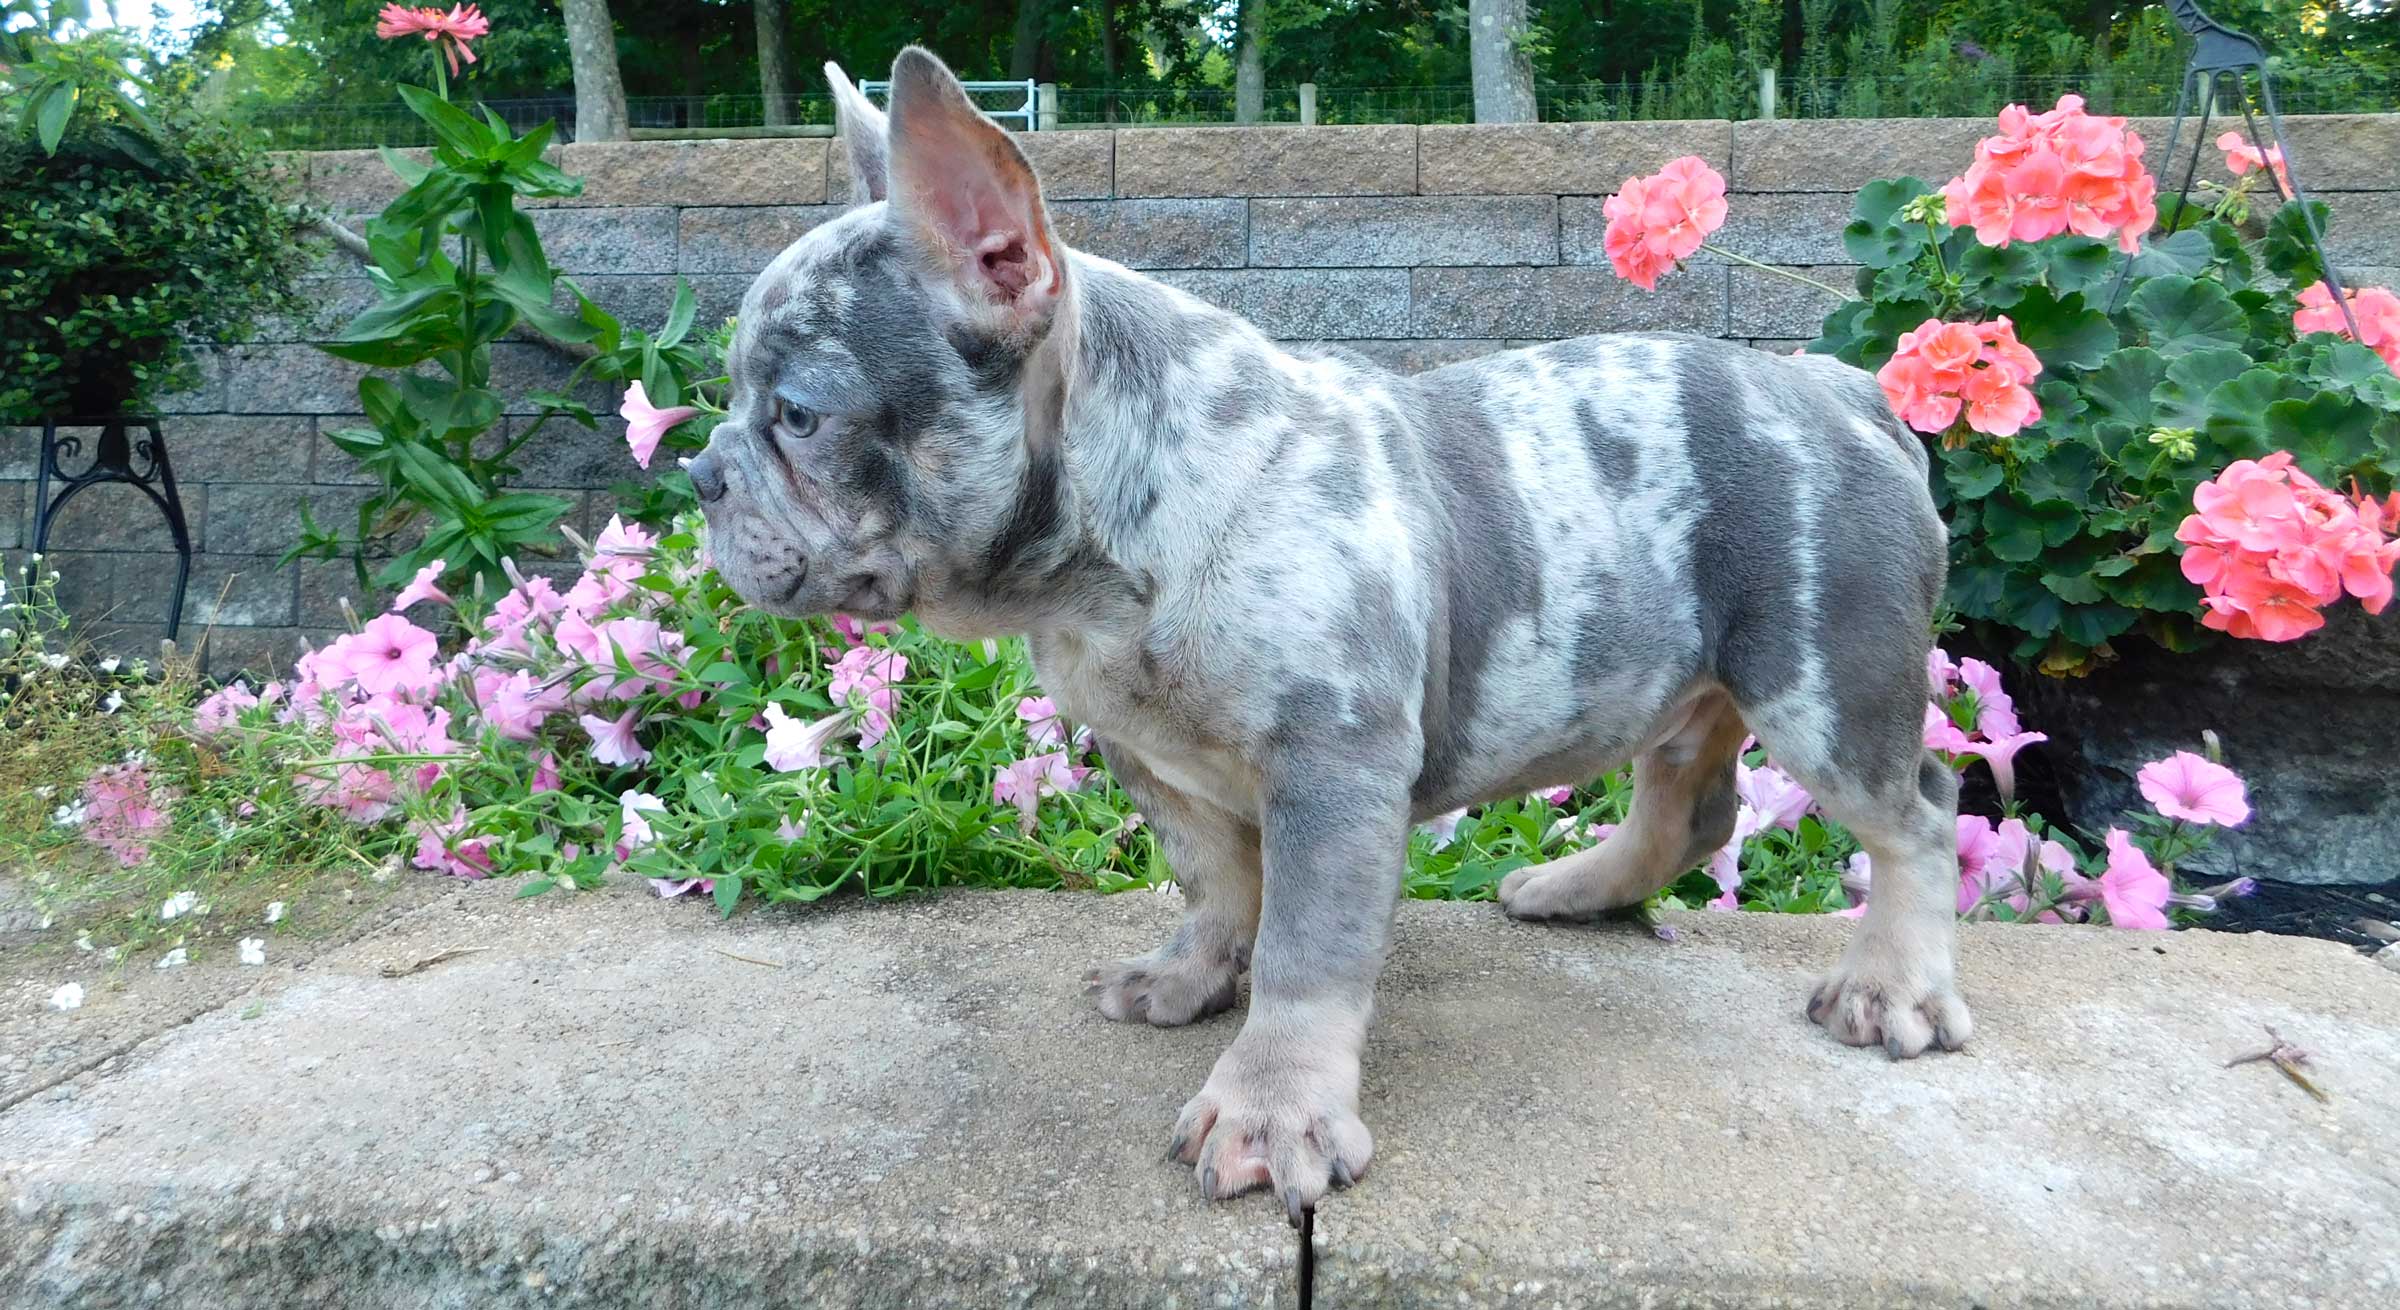 frenchie puppies for sale in ohio